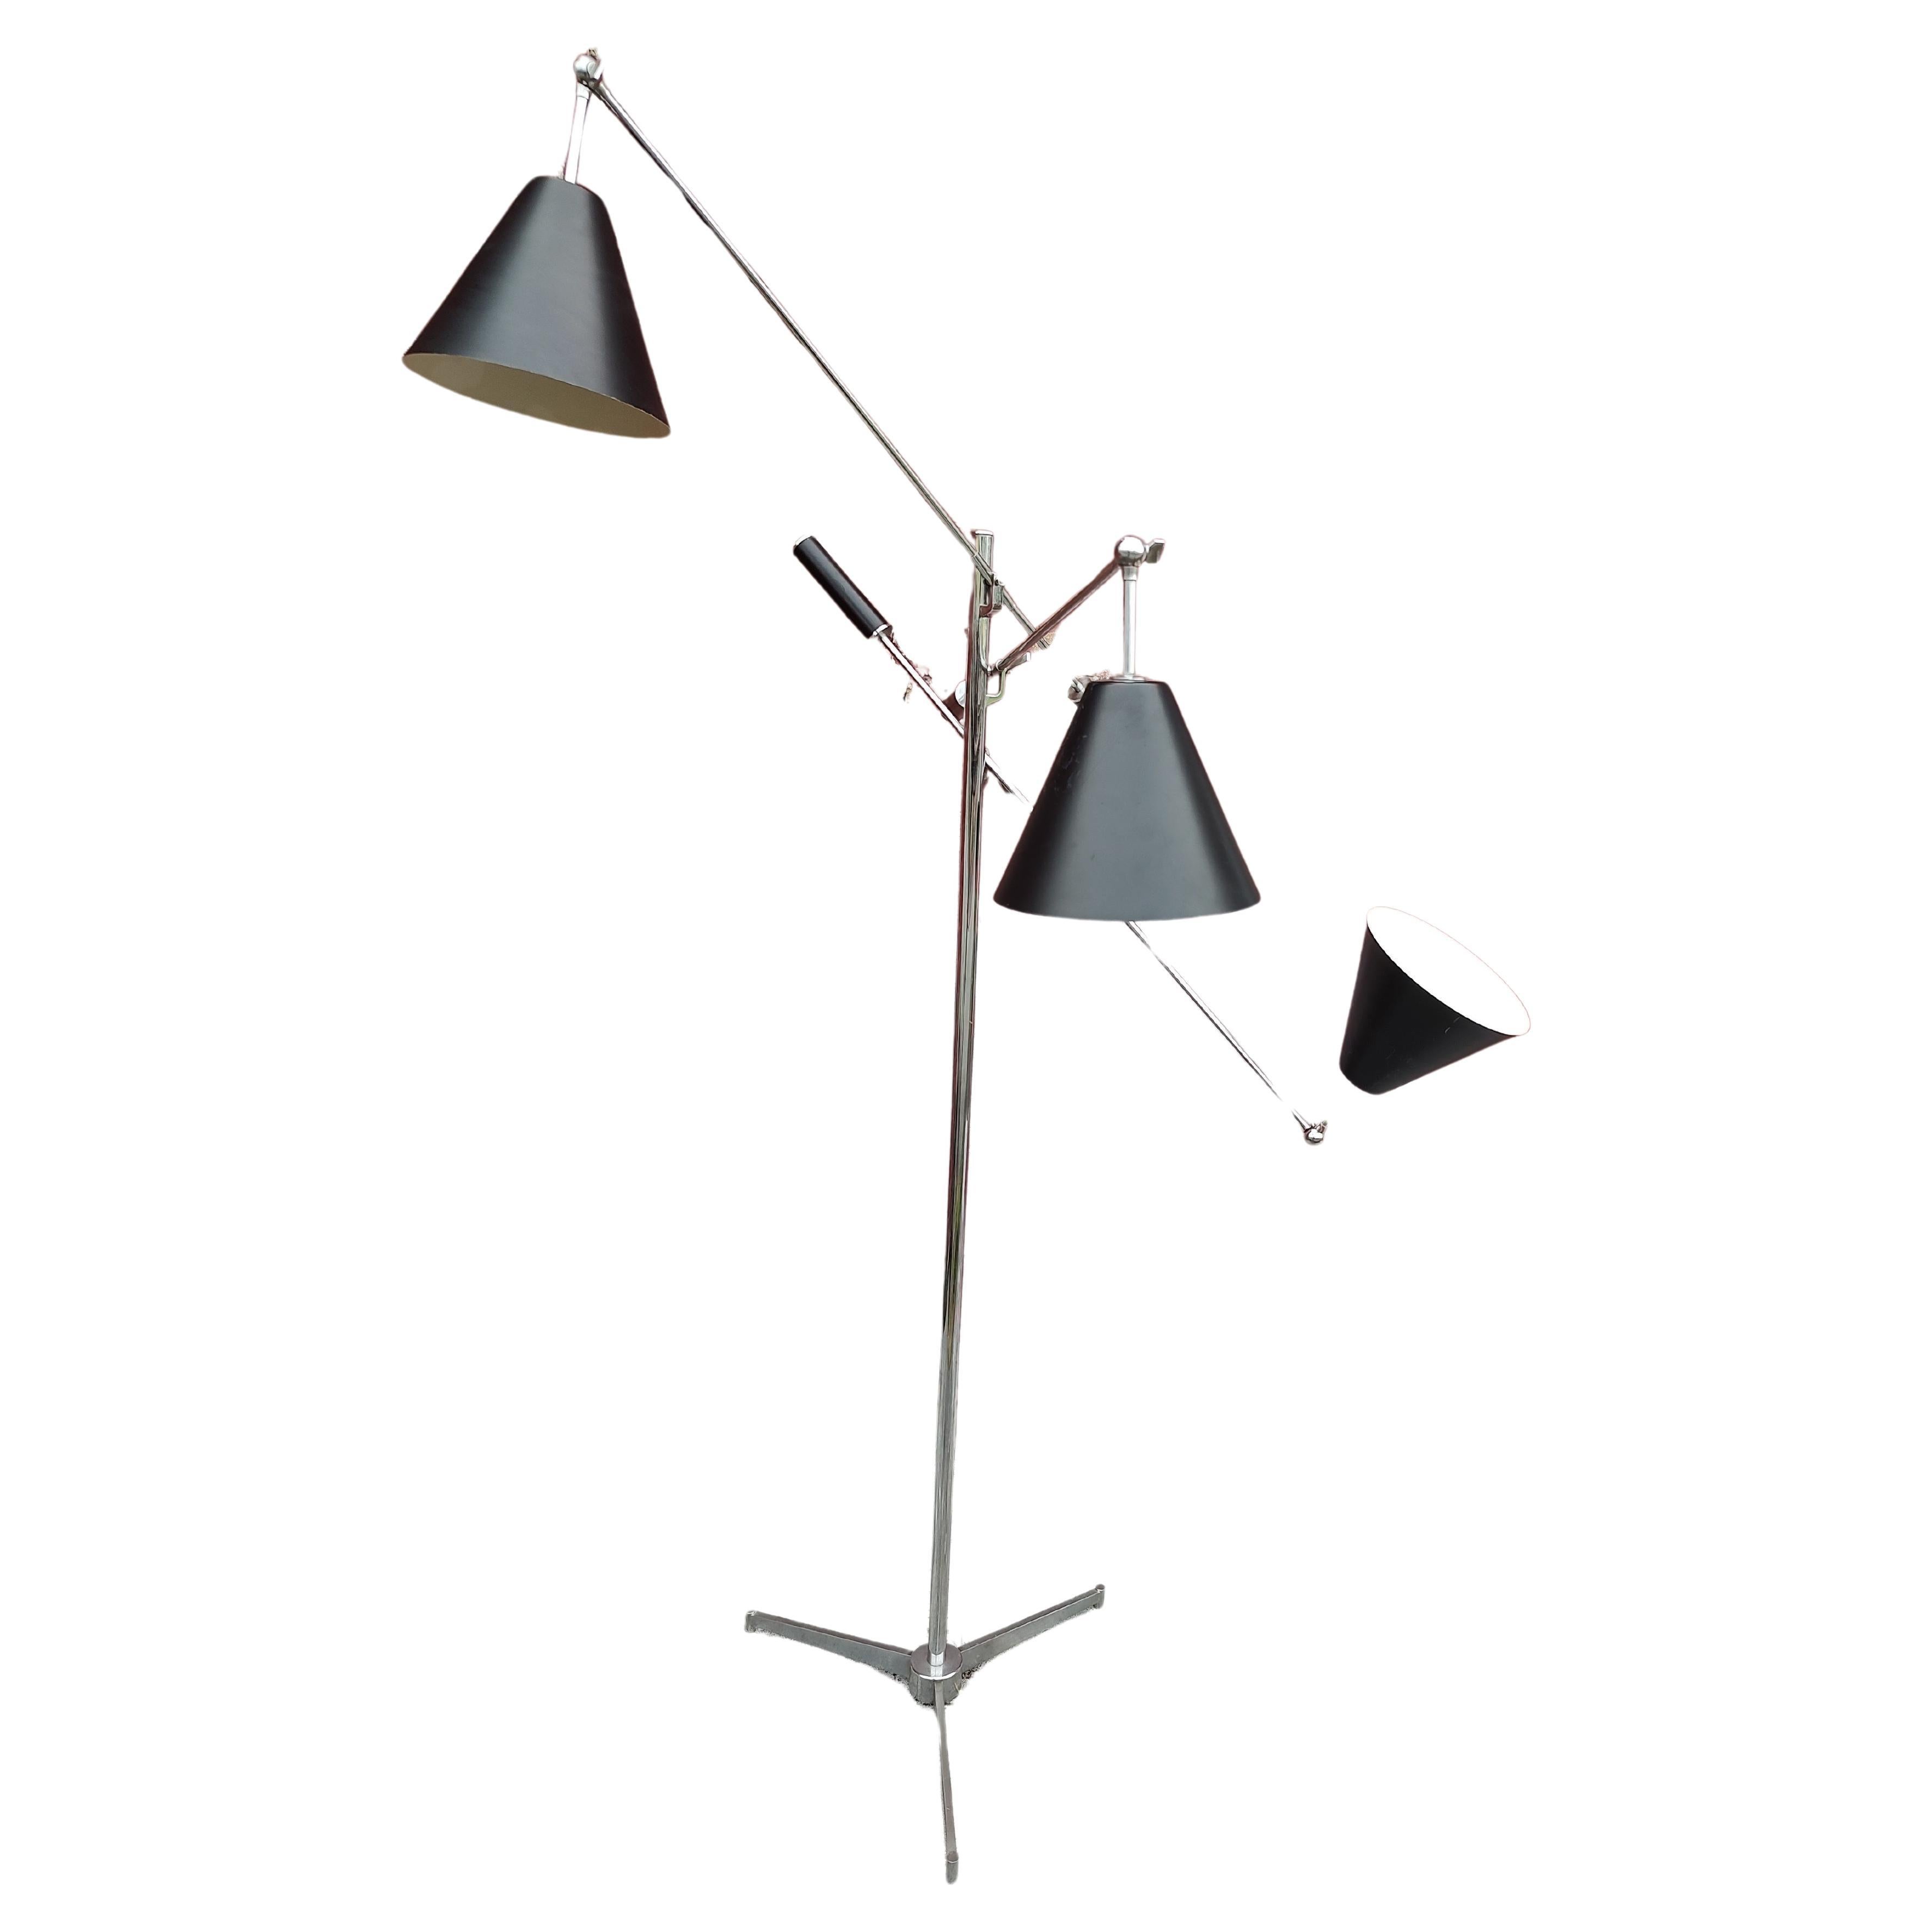 Hand-Crafted Mid Century Modern Sculptural Triennial Floor Lamp by Gino Sarfatti Italy C1960 For Sale